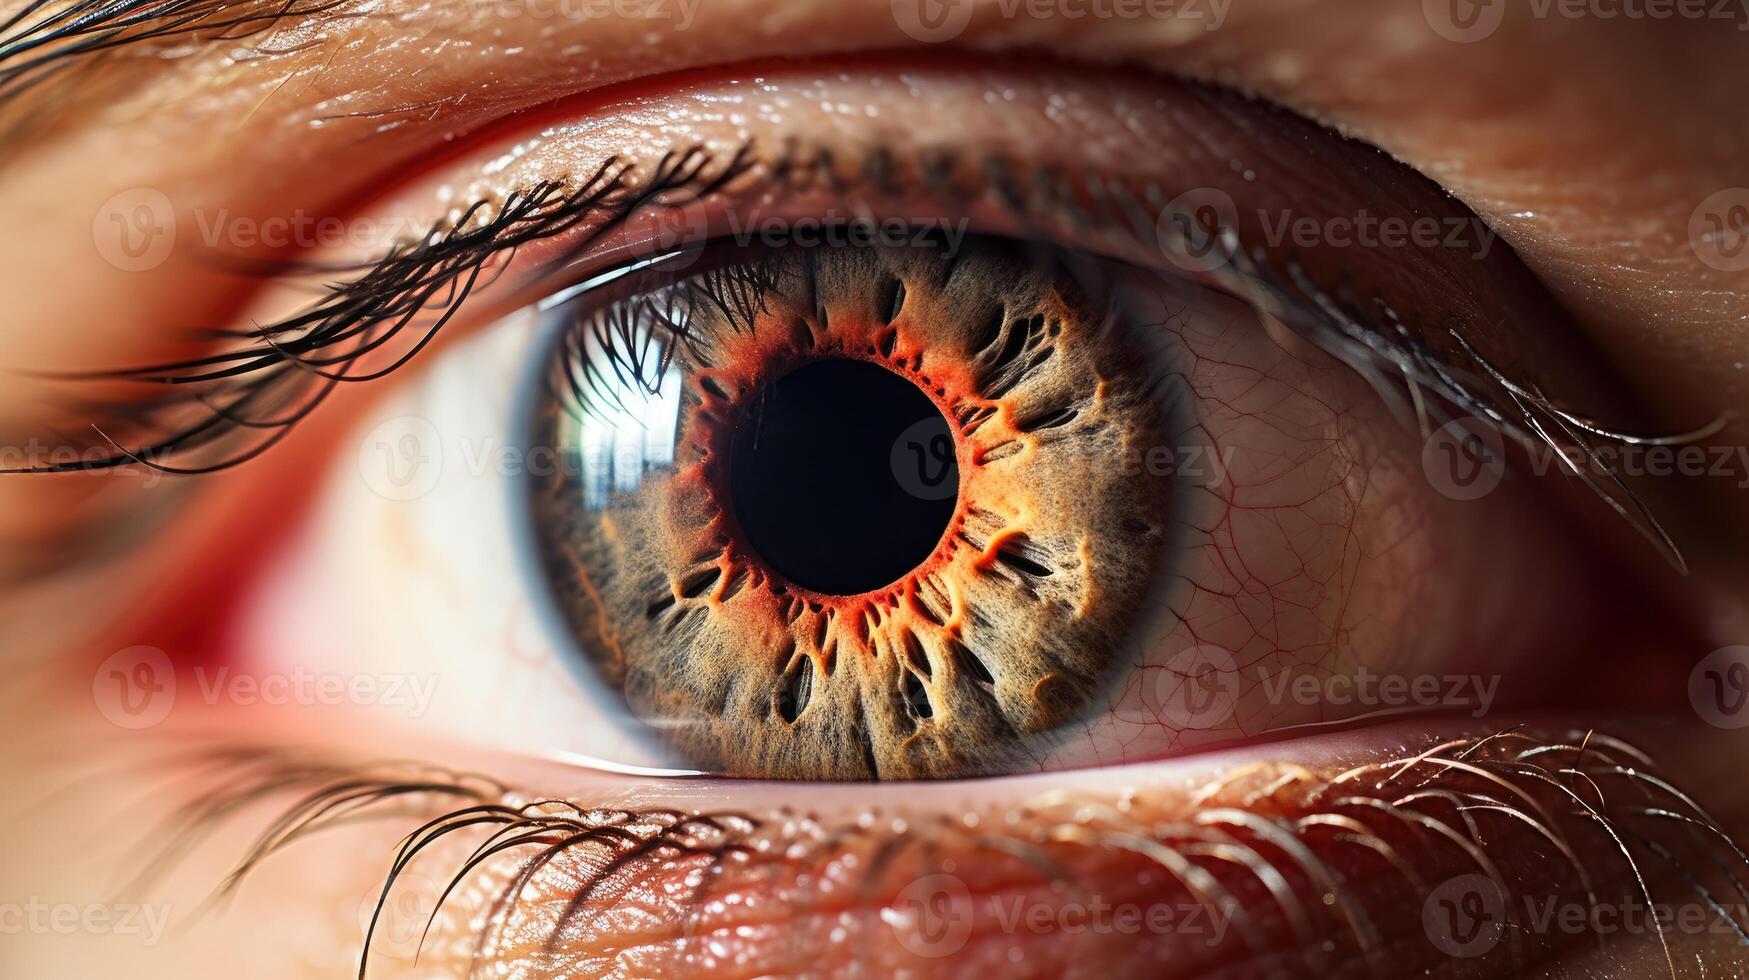 AI generated Extreme closeup image of a human eye. Macro photography with the concept of healthy vision, eye treatment education, and futuristic professional photo shoots.